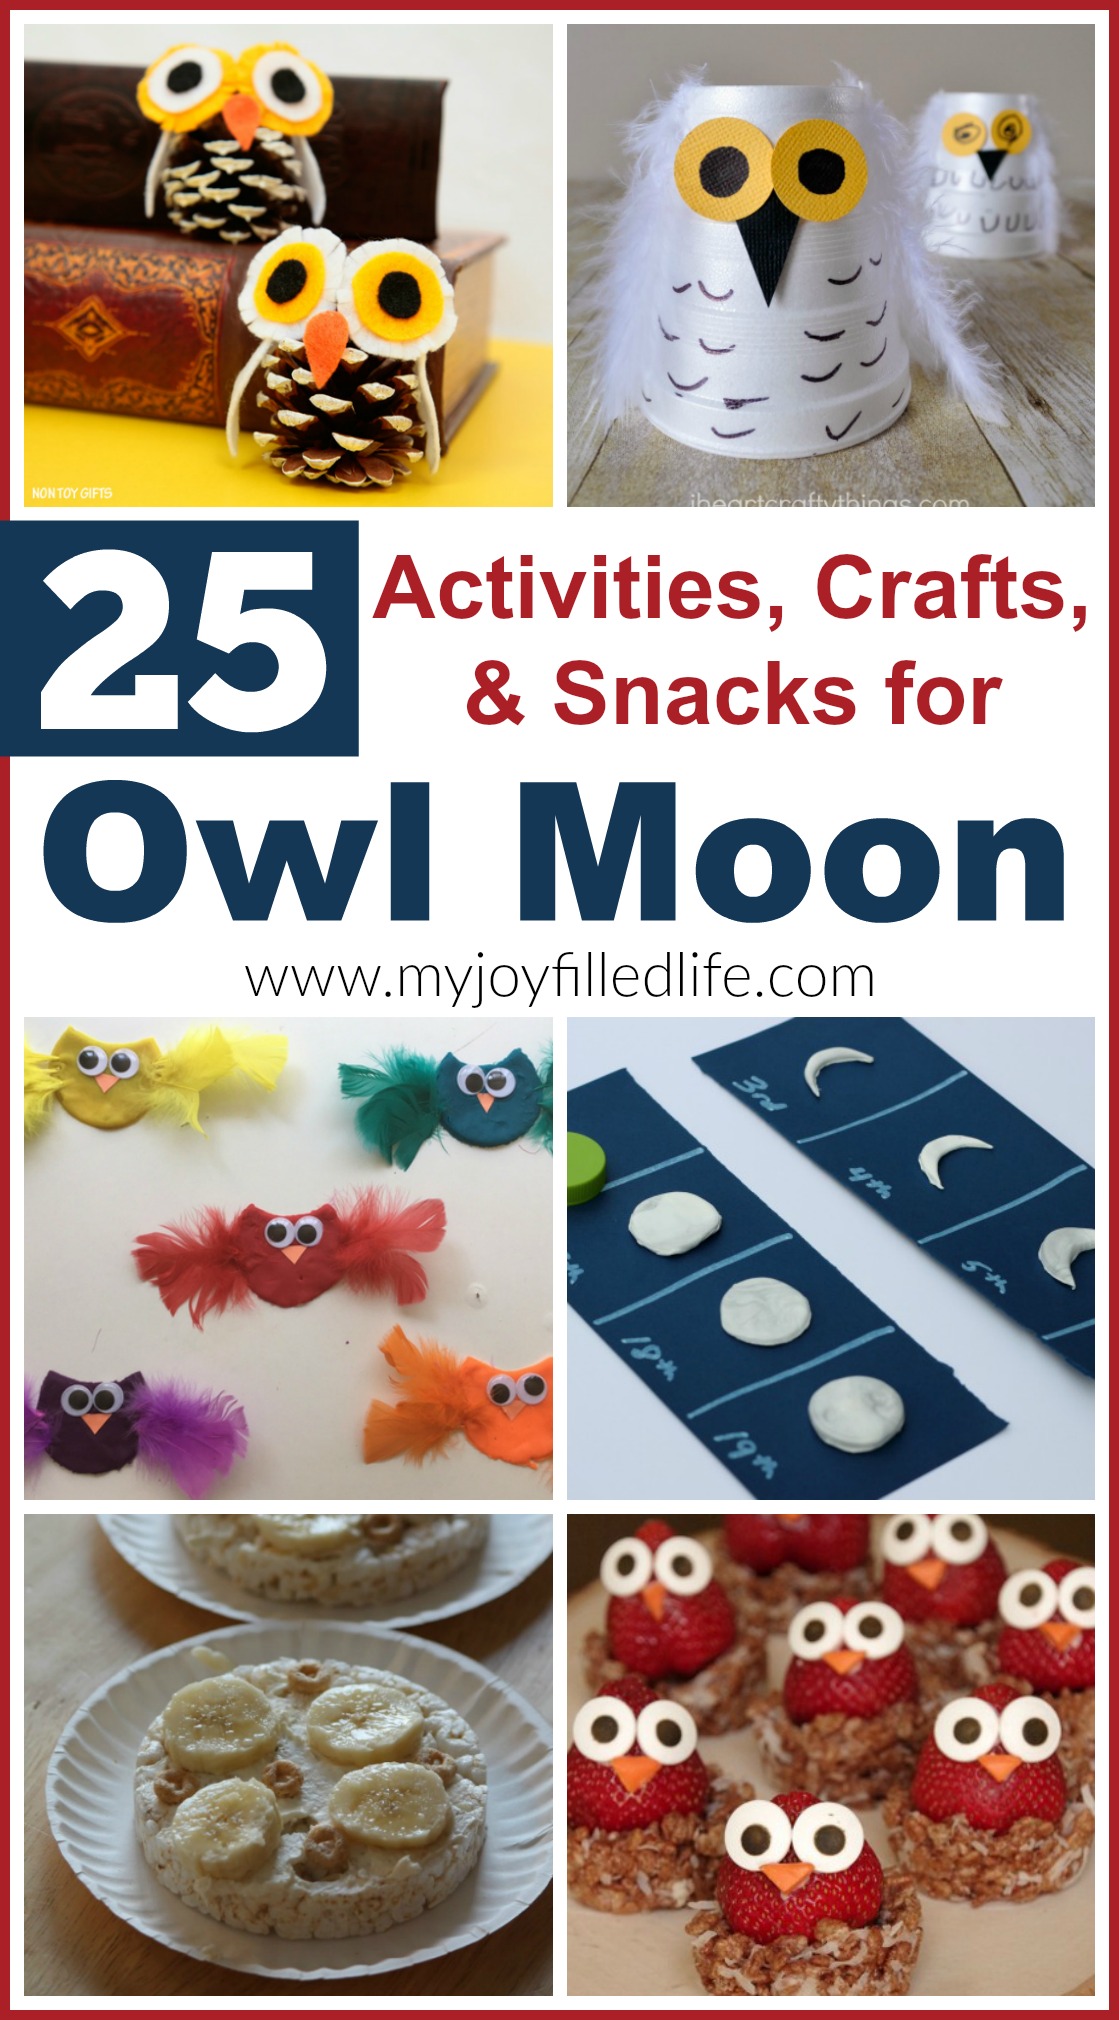 Activities, Crafts, and Snacks for Owl Moon